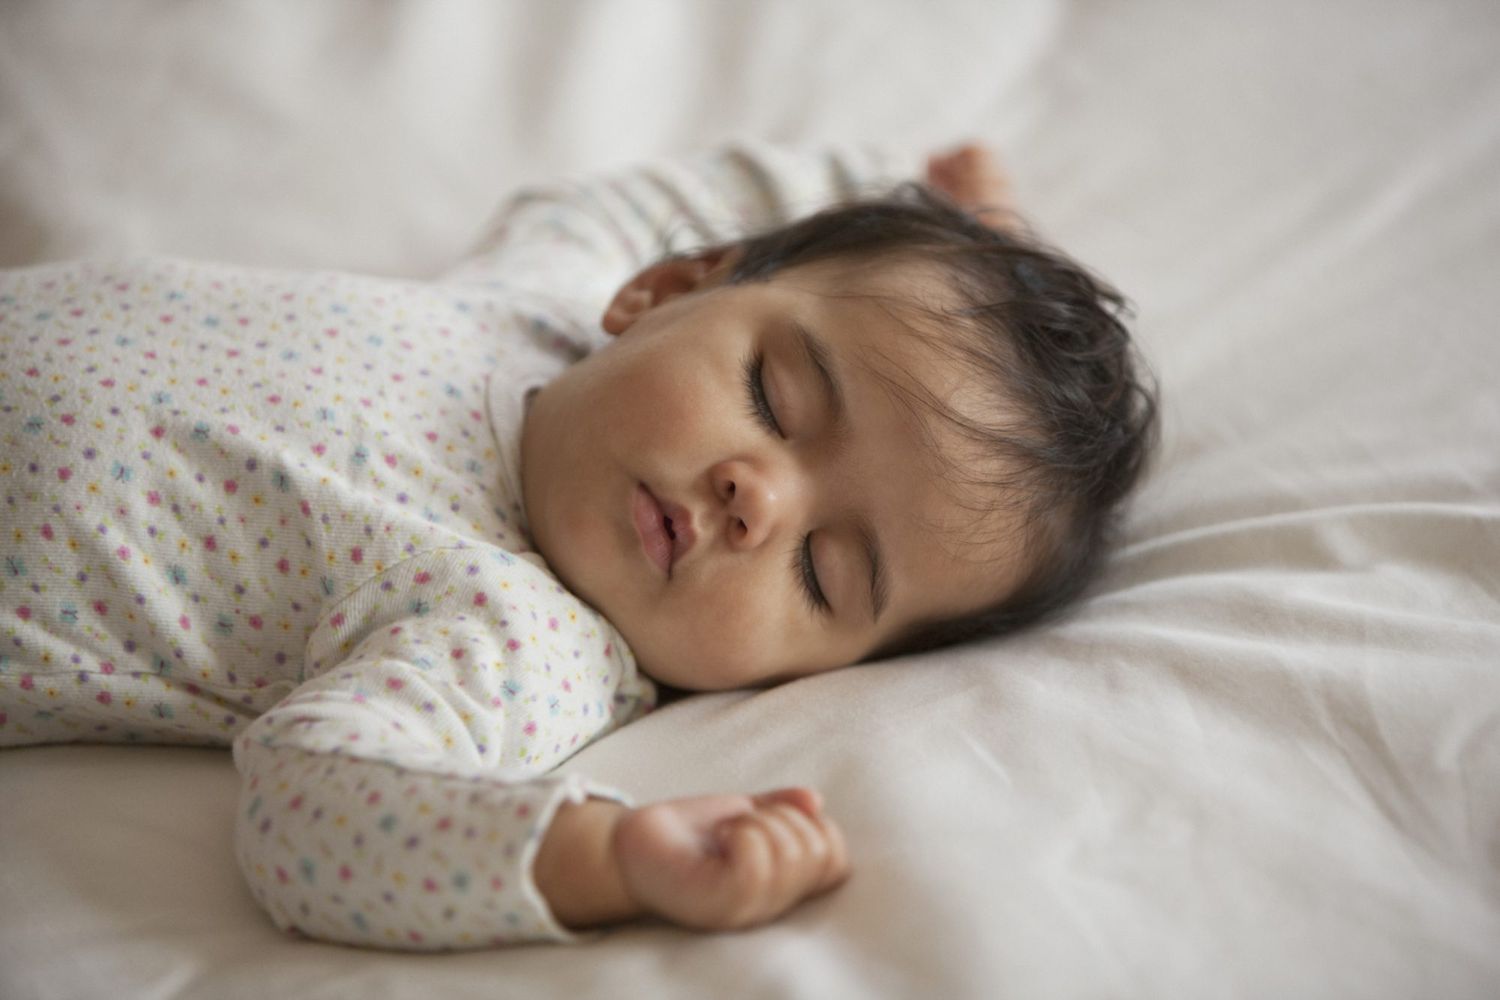 An image of a baby sleeping.